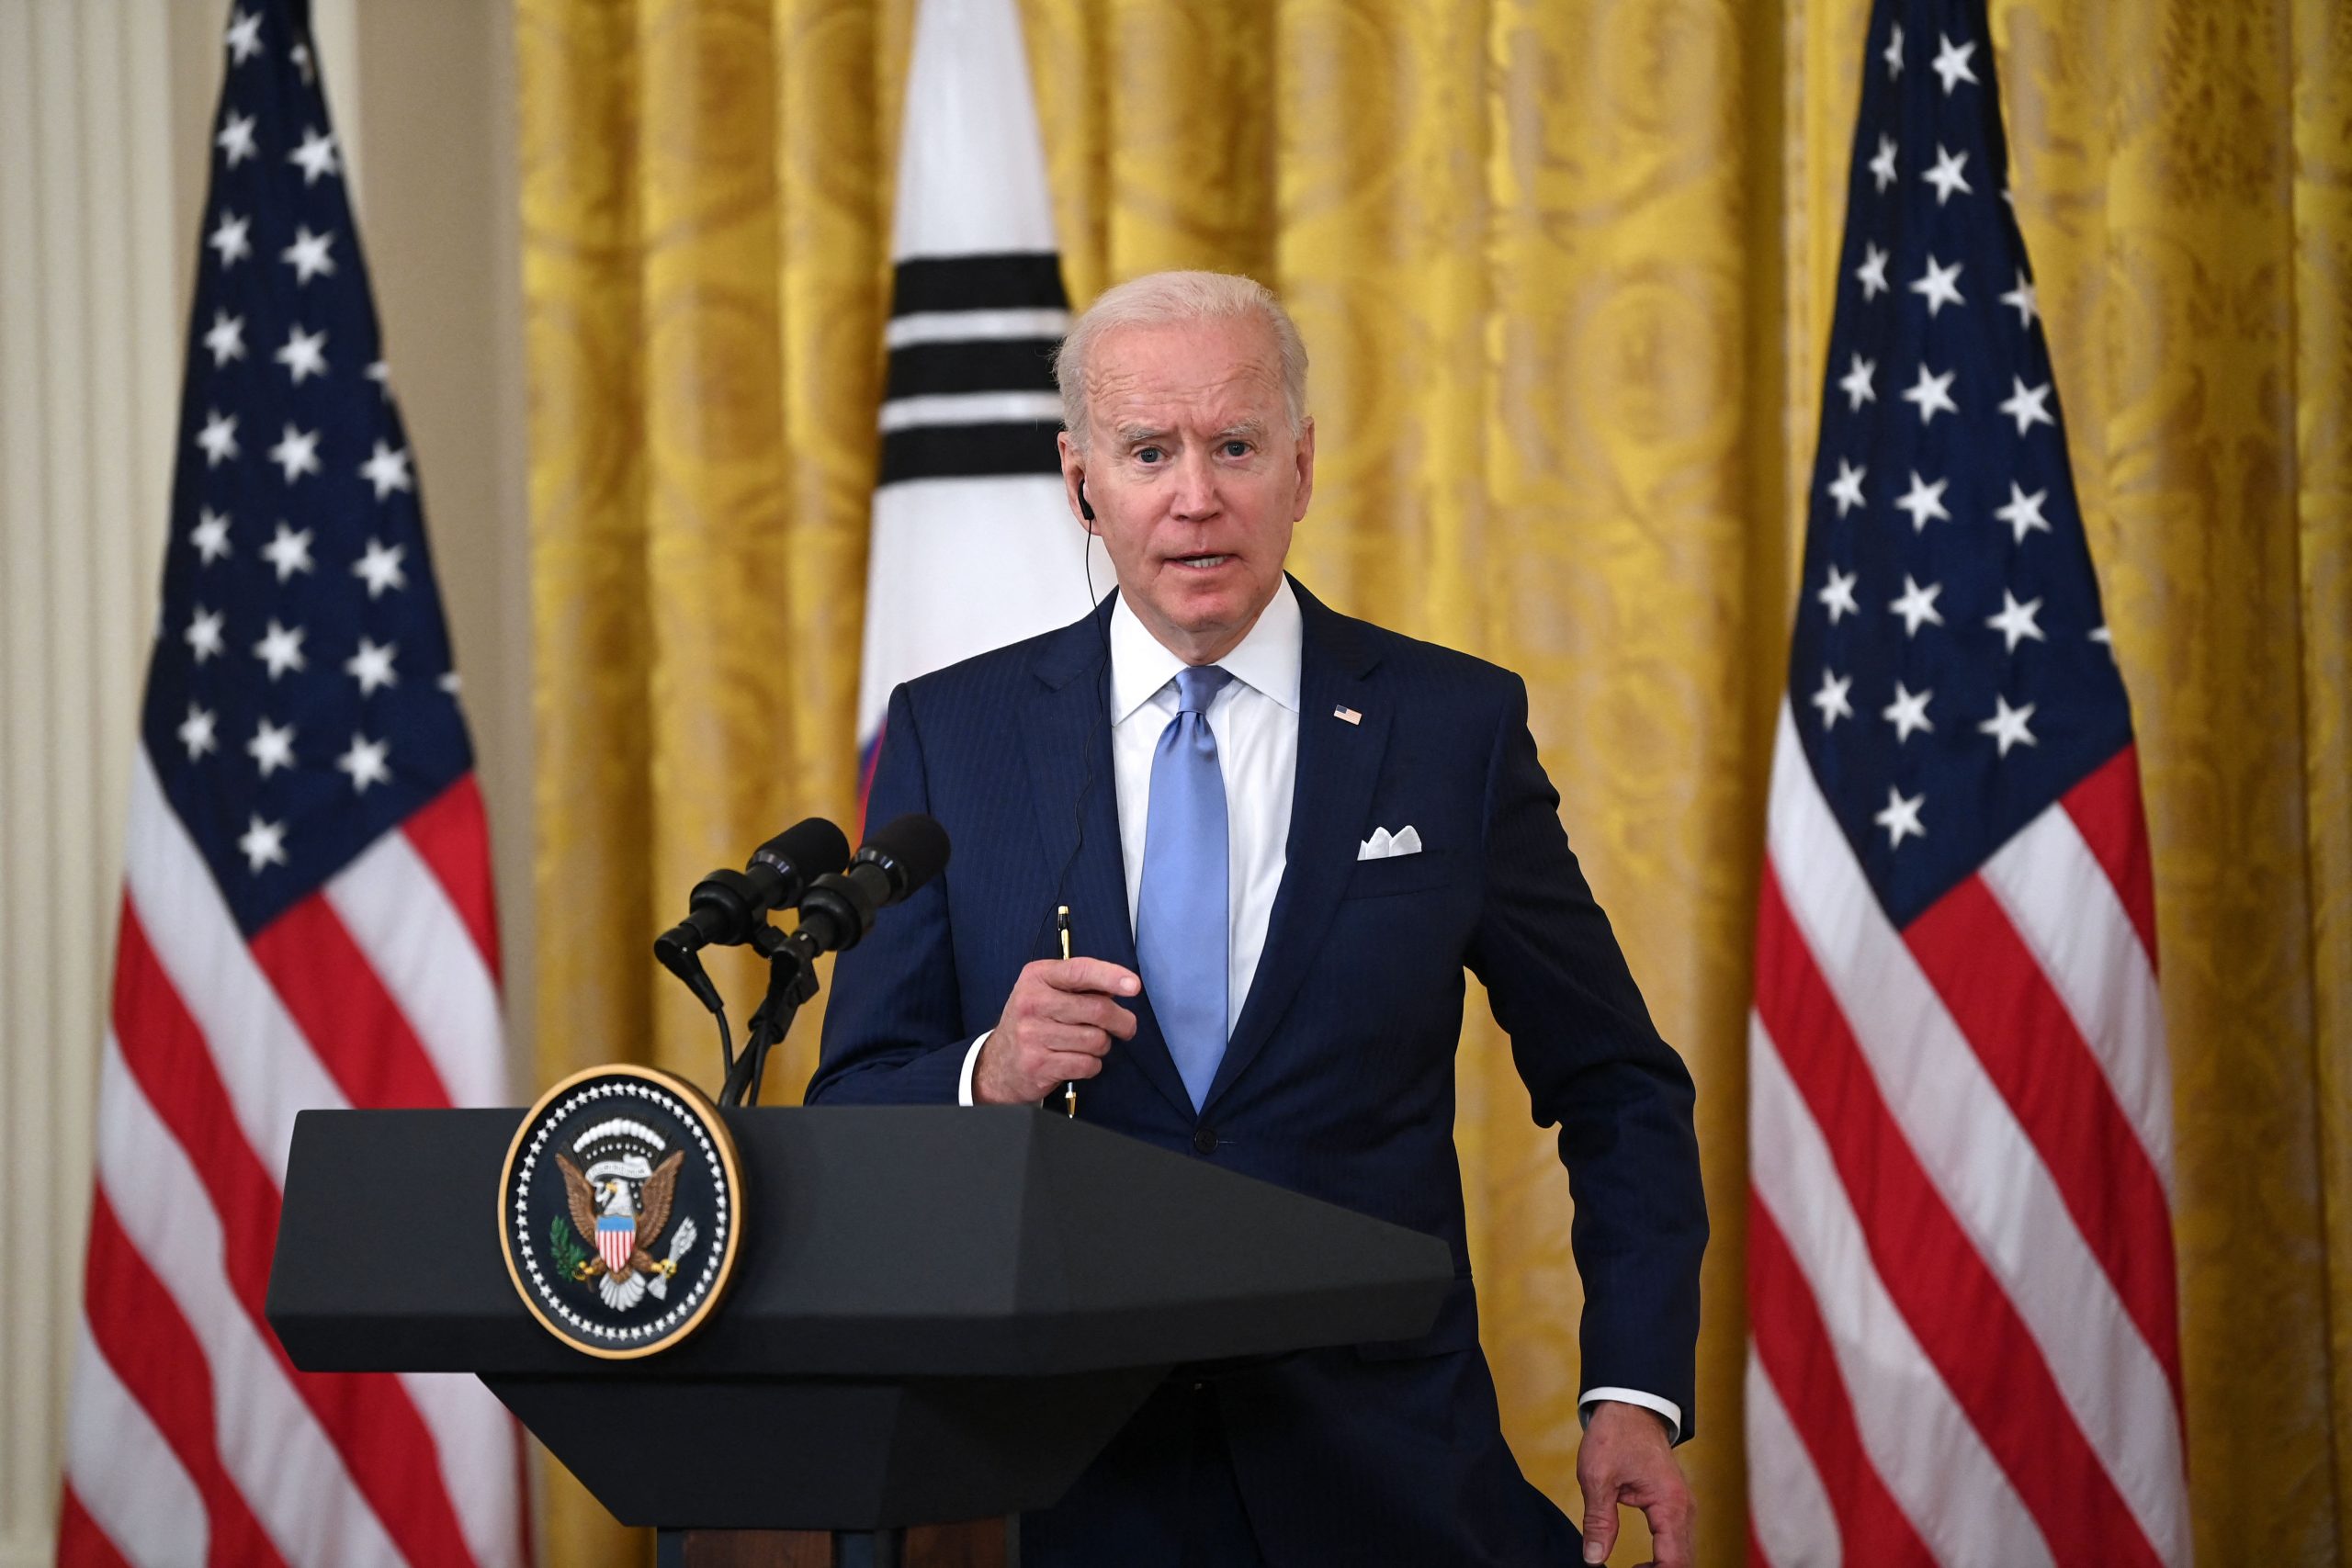 Sad day for media: Biden lashes out at Beijing after Apple Daily closure